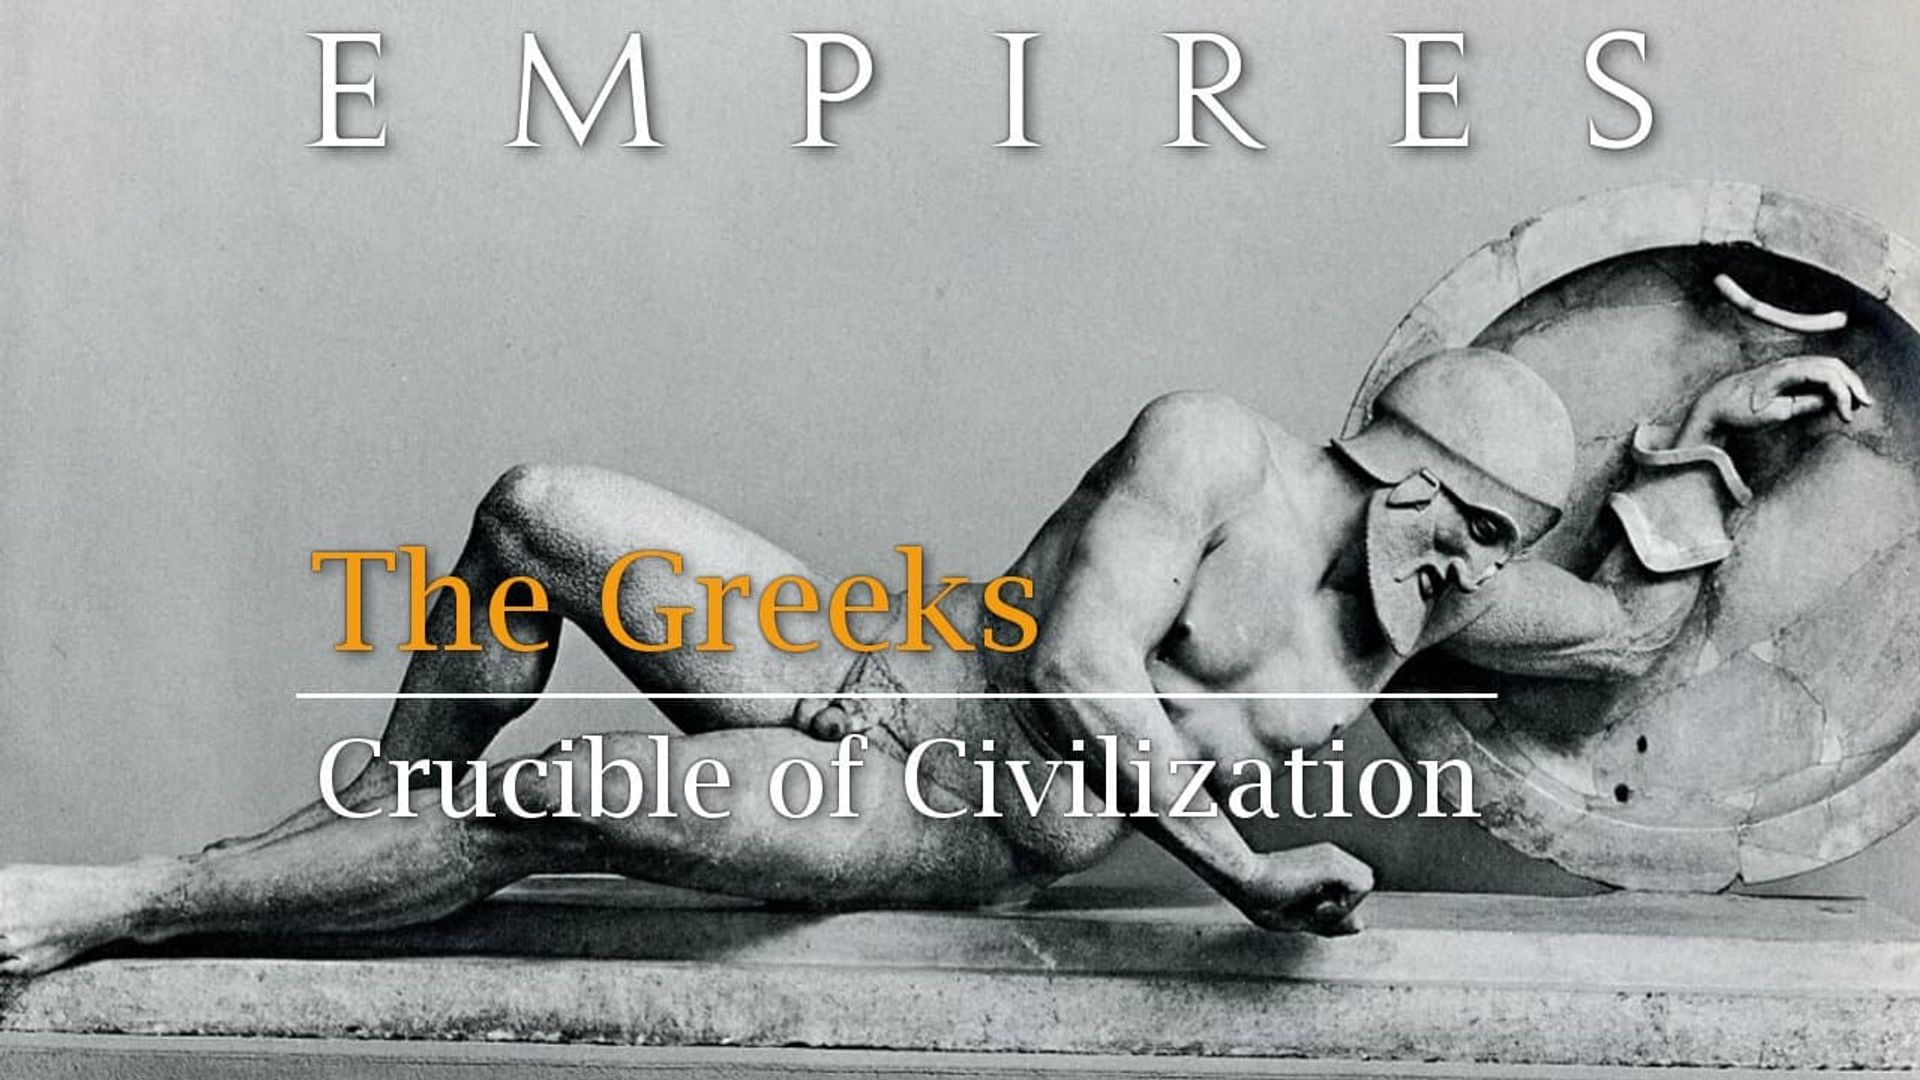 Empires: The Greeks - Crucible of Civilization background